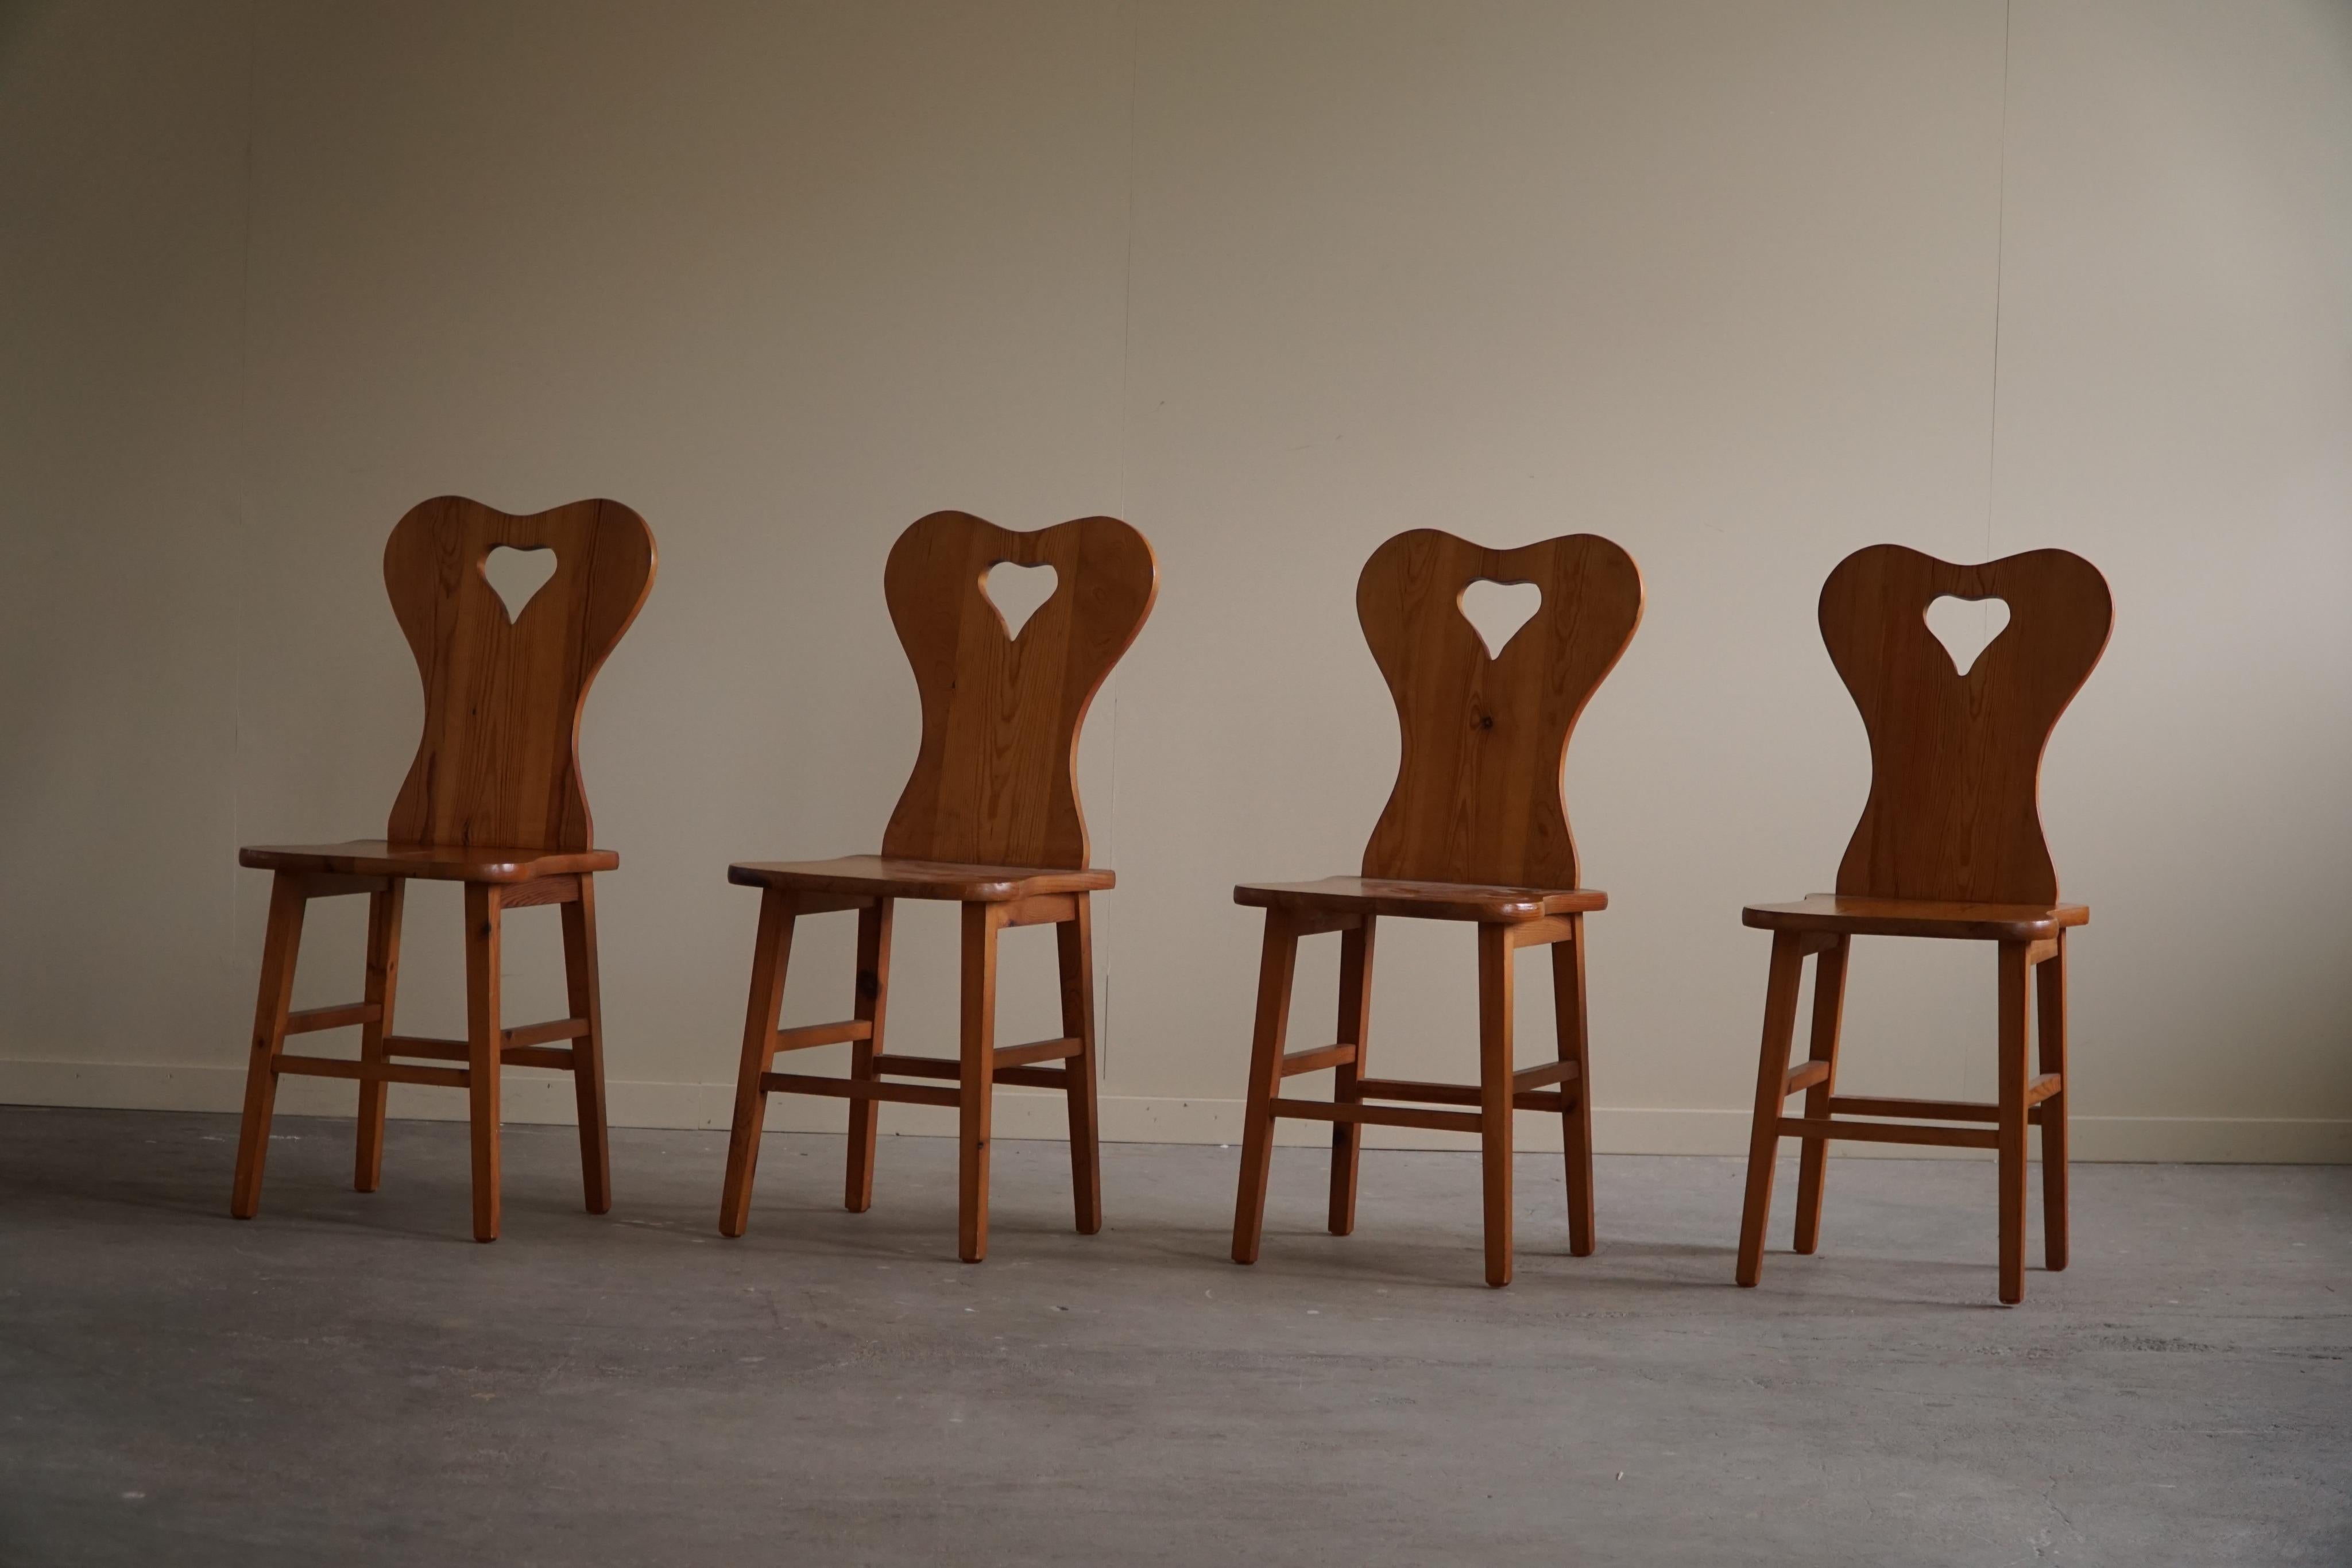 Set of 4 Chairs in Pine, by a Swedish Cabinetmaker, Scandinavian Modern, 1960s For Sale 5